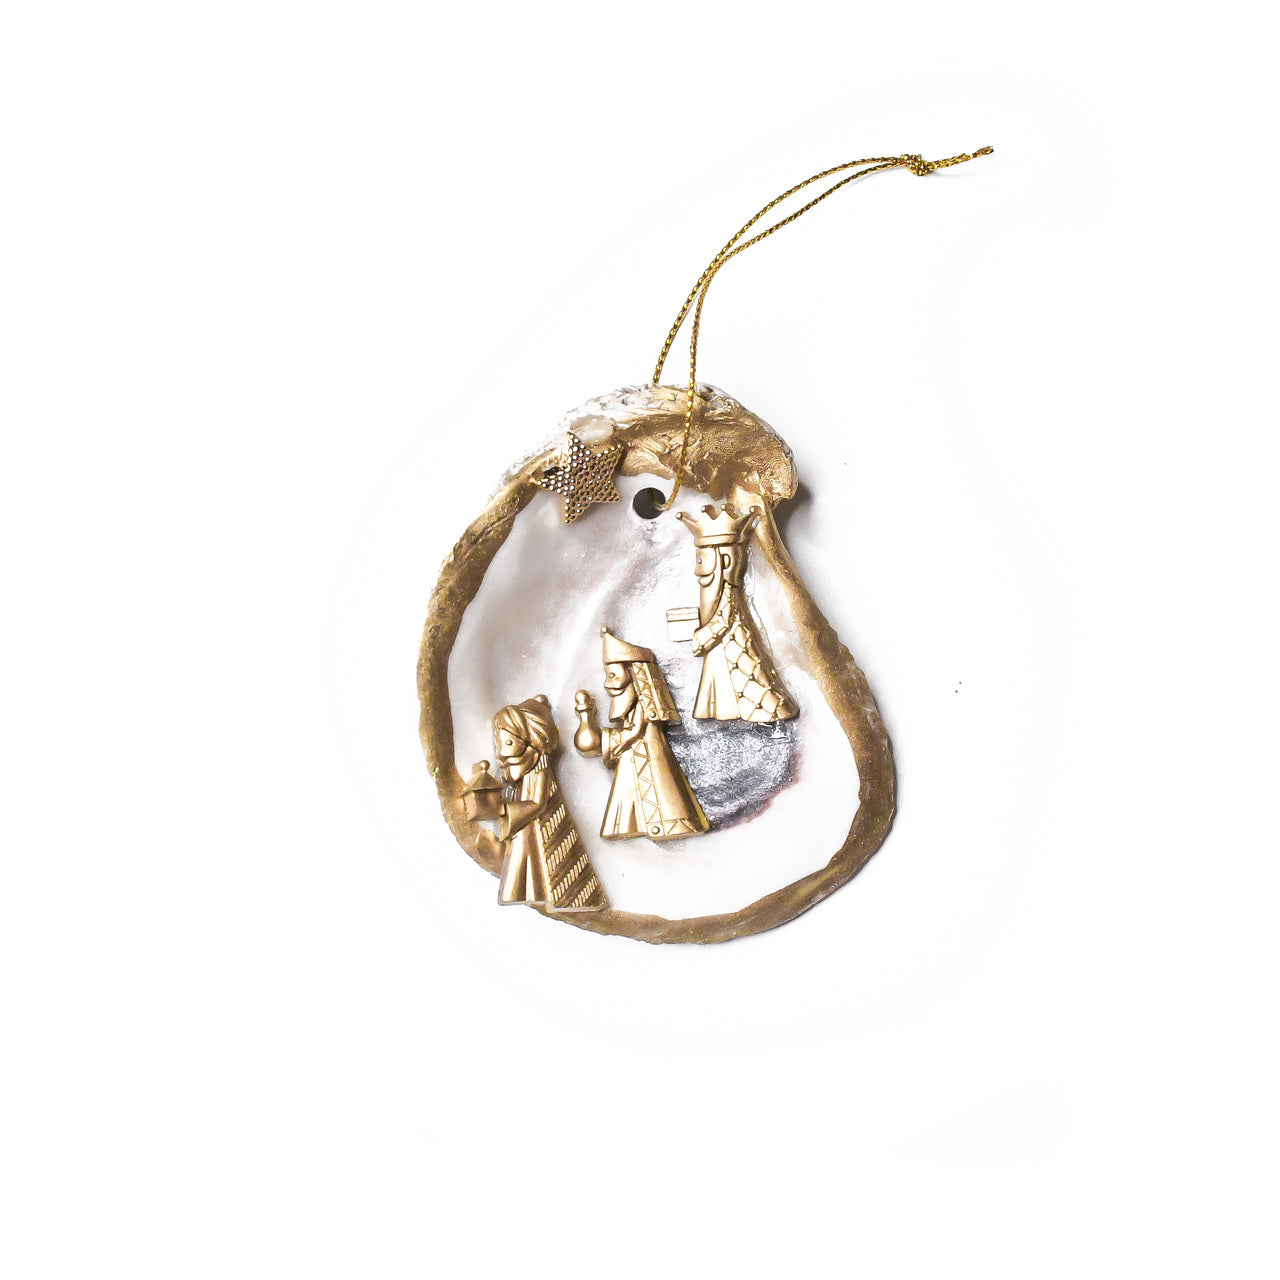 Gold Oyster Ornament